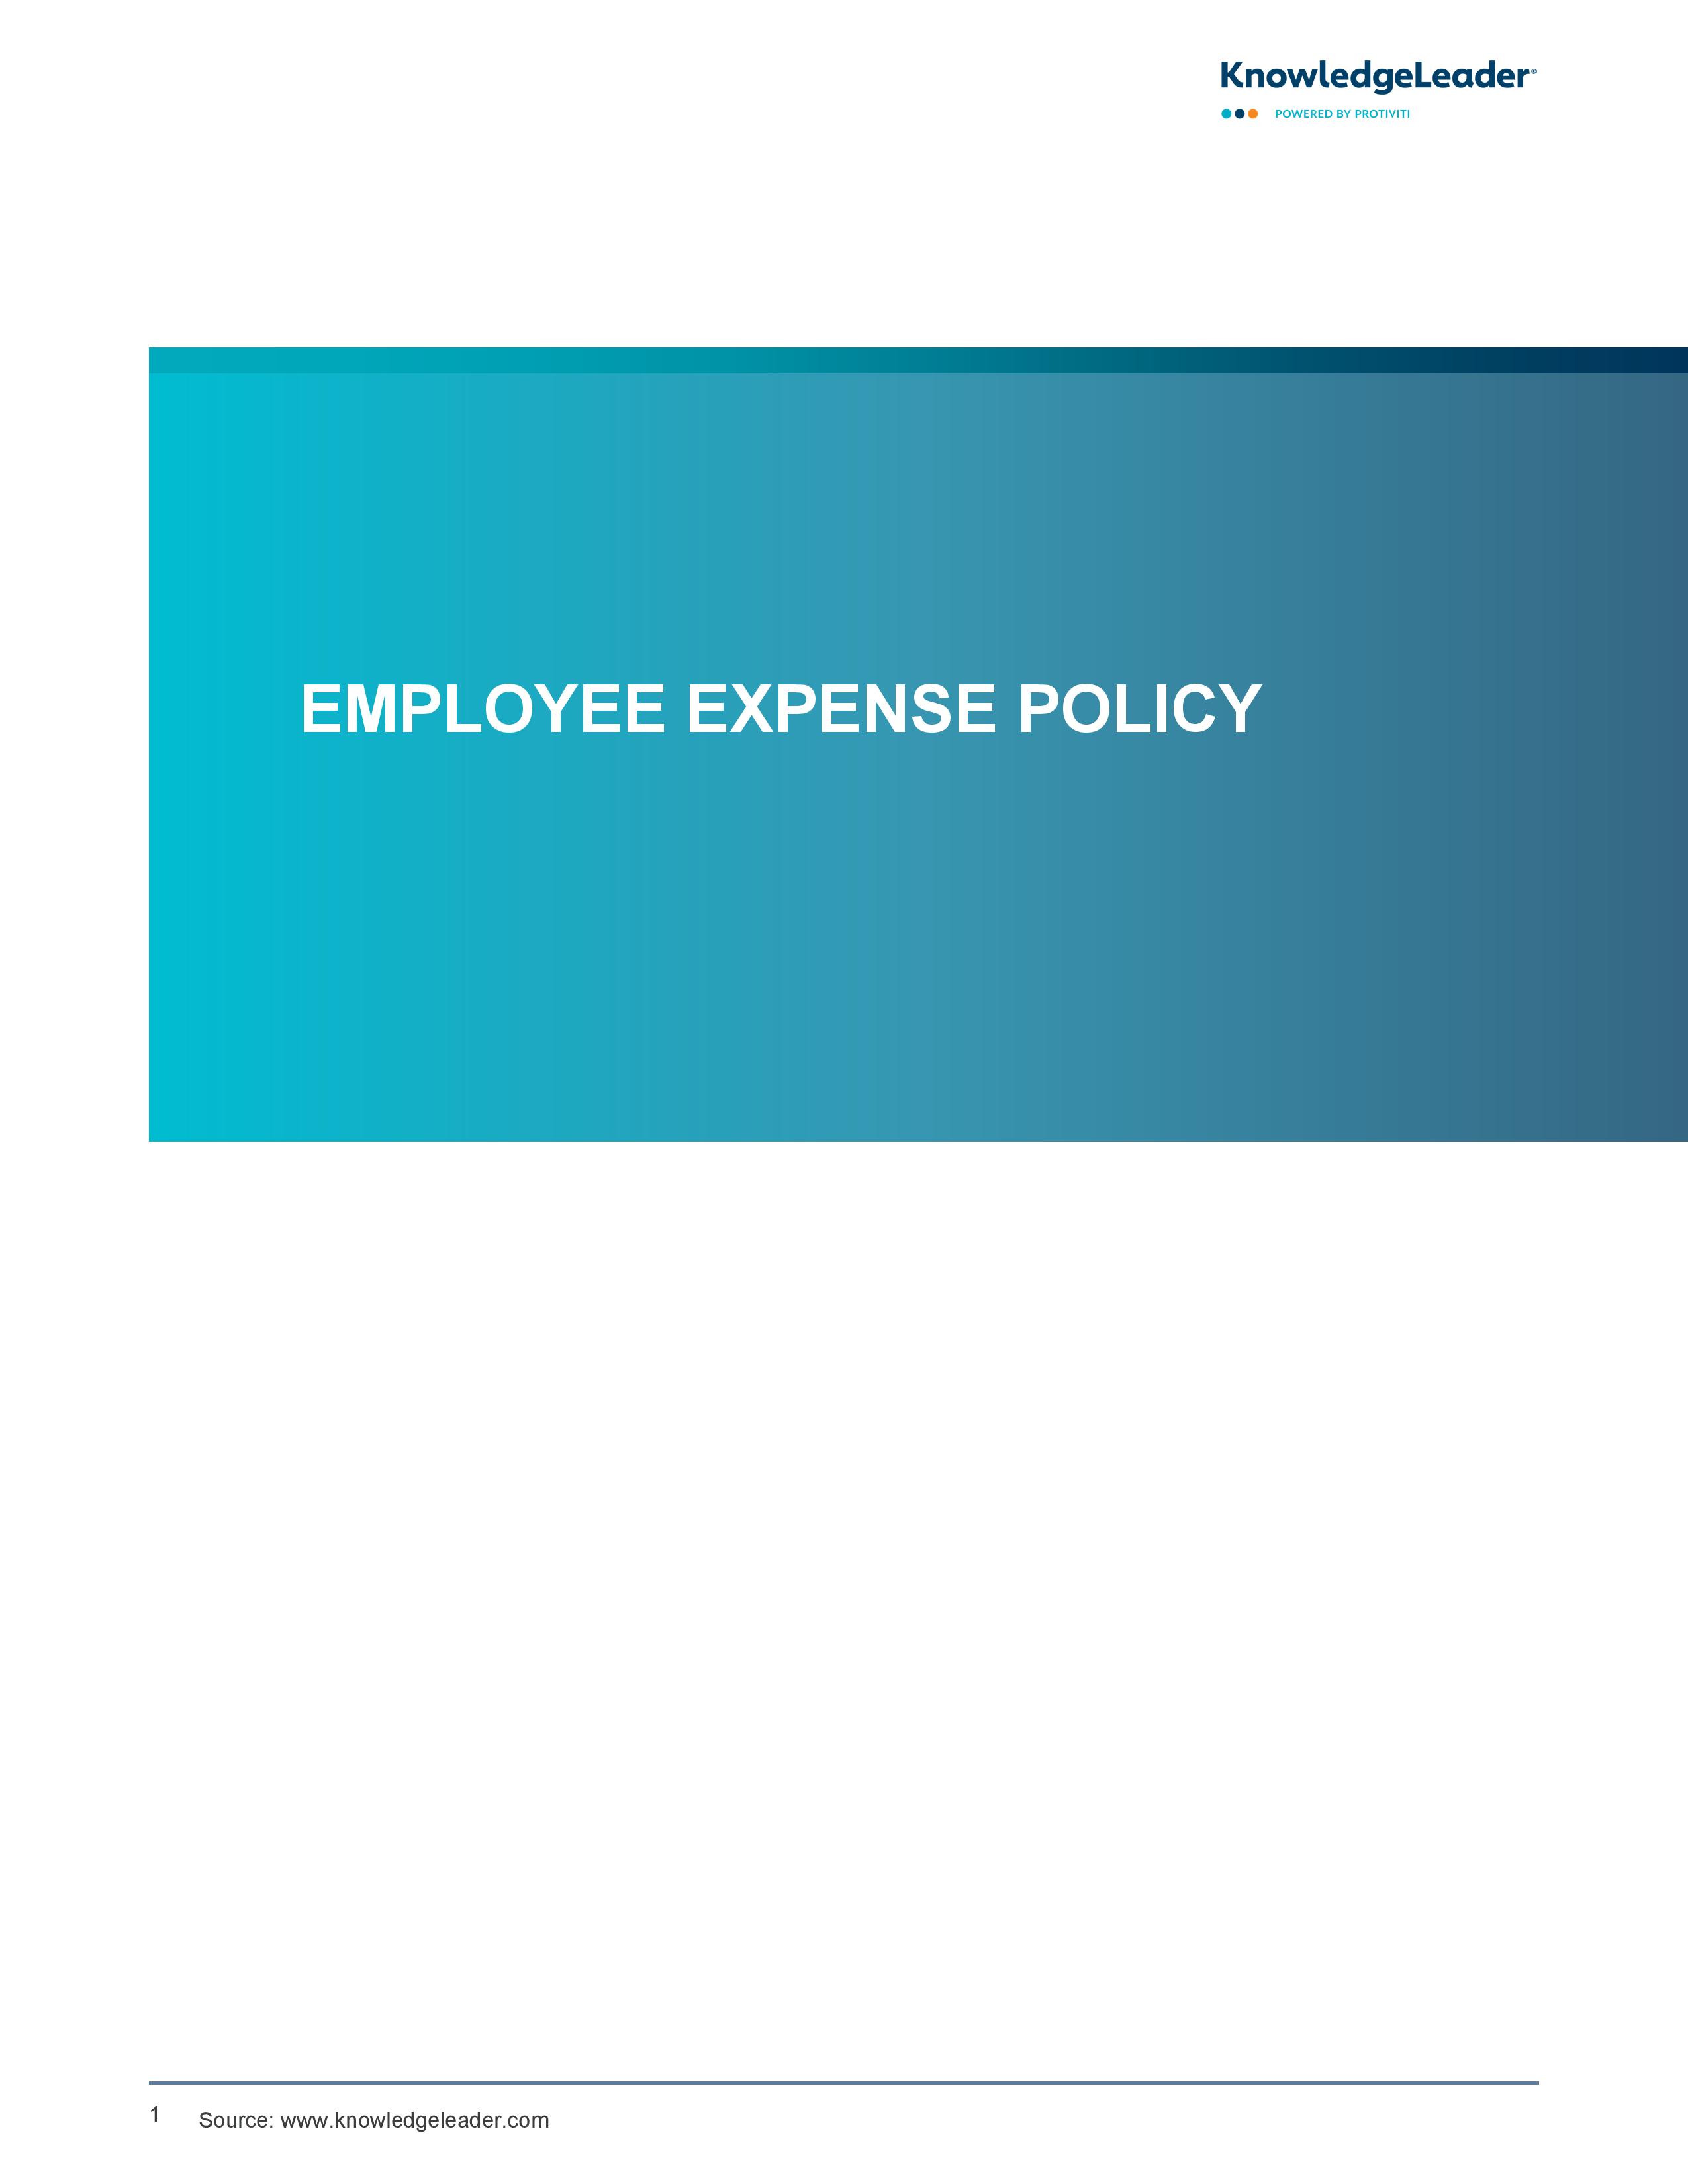 screenshot of the first page of Employee Expense Policy